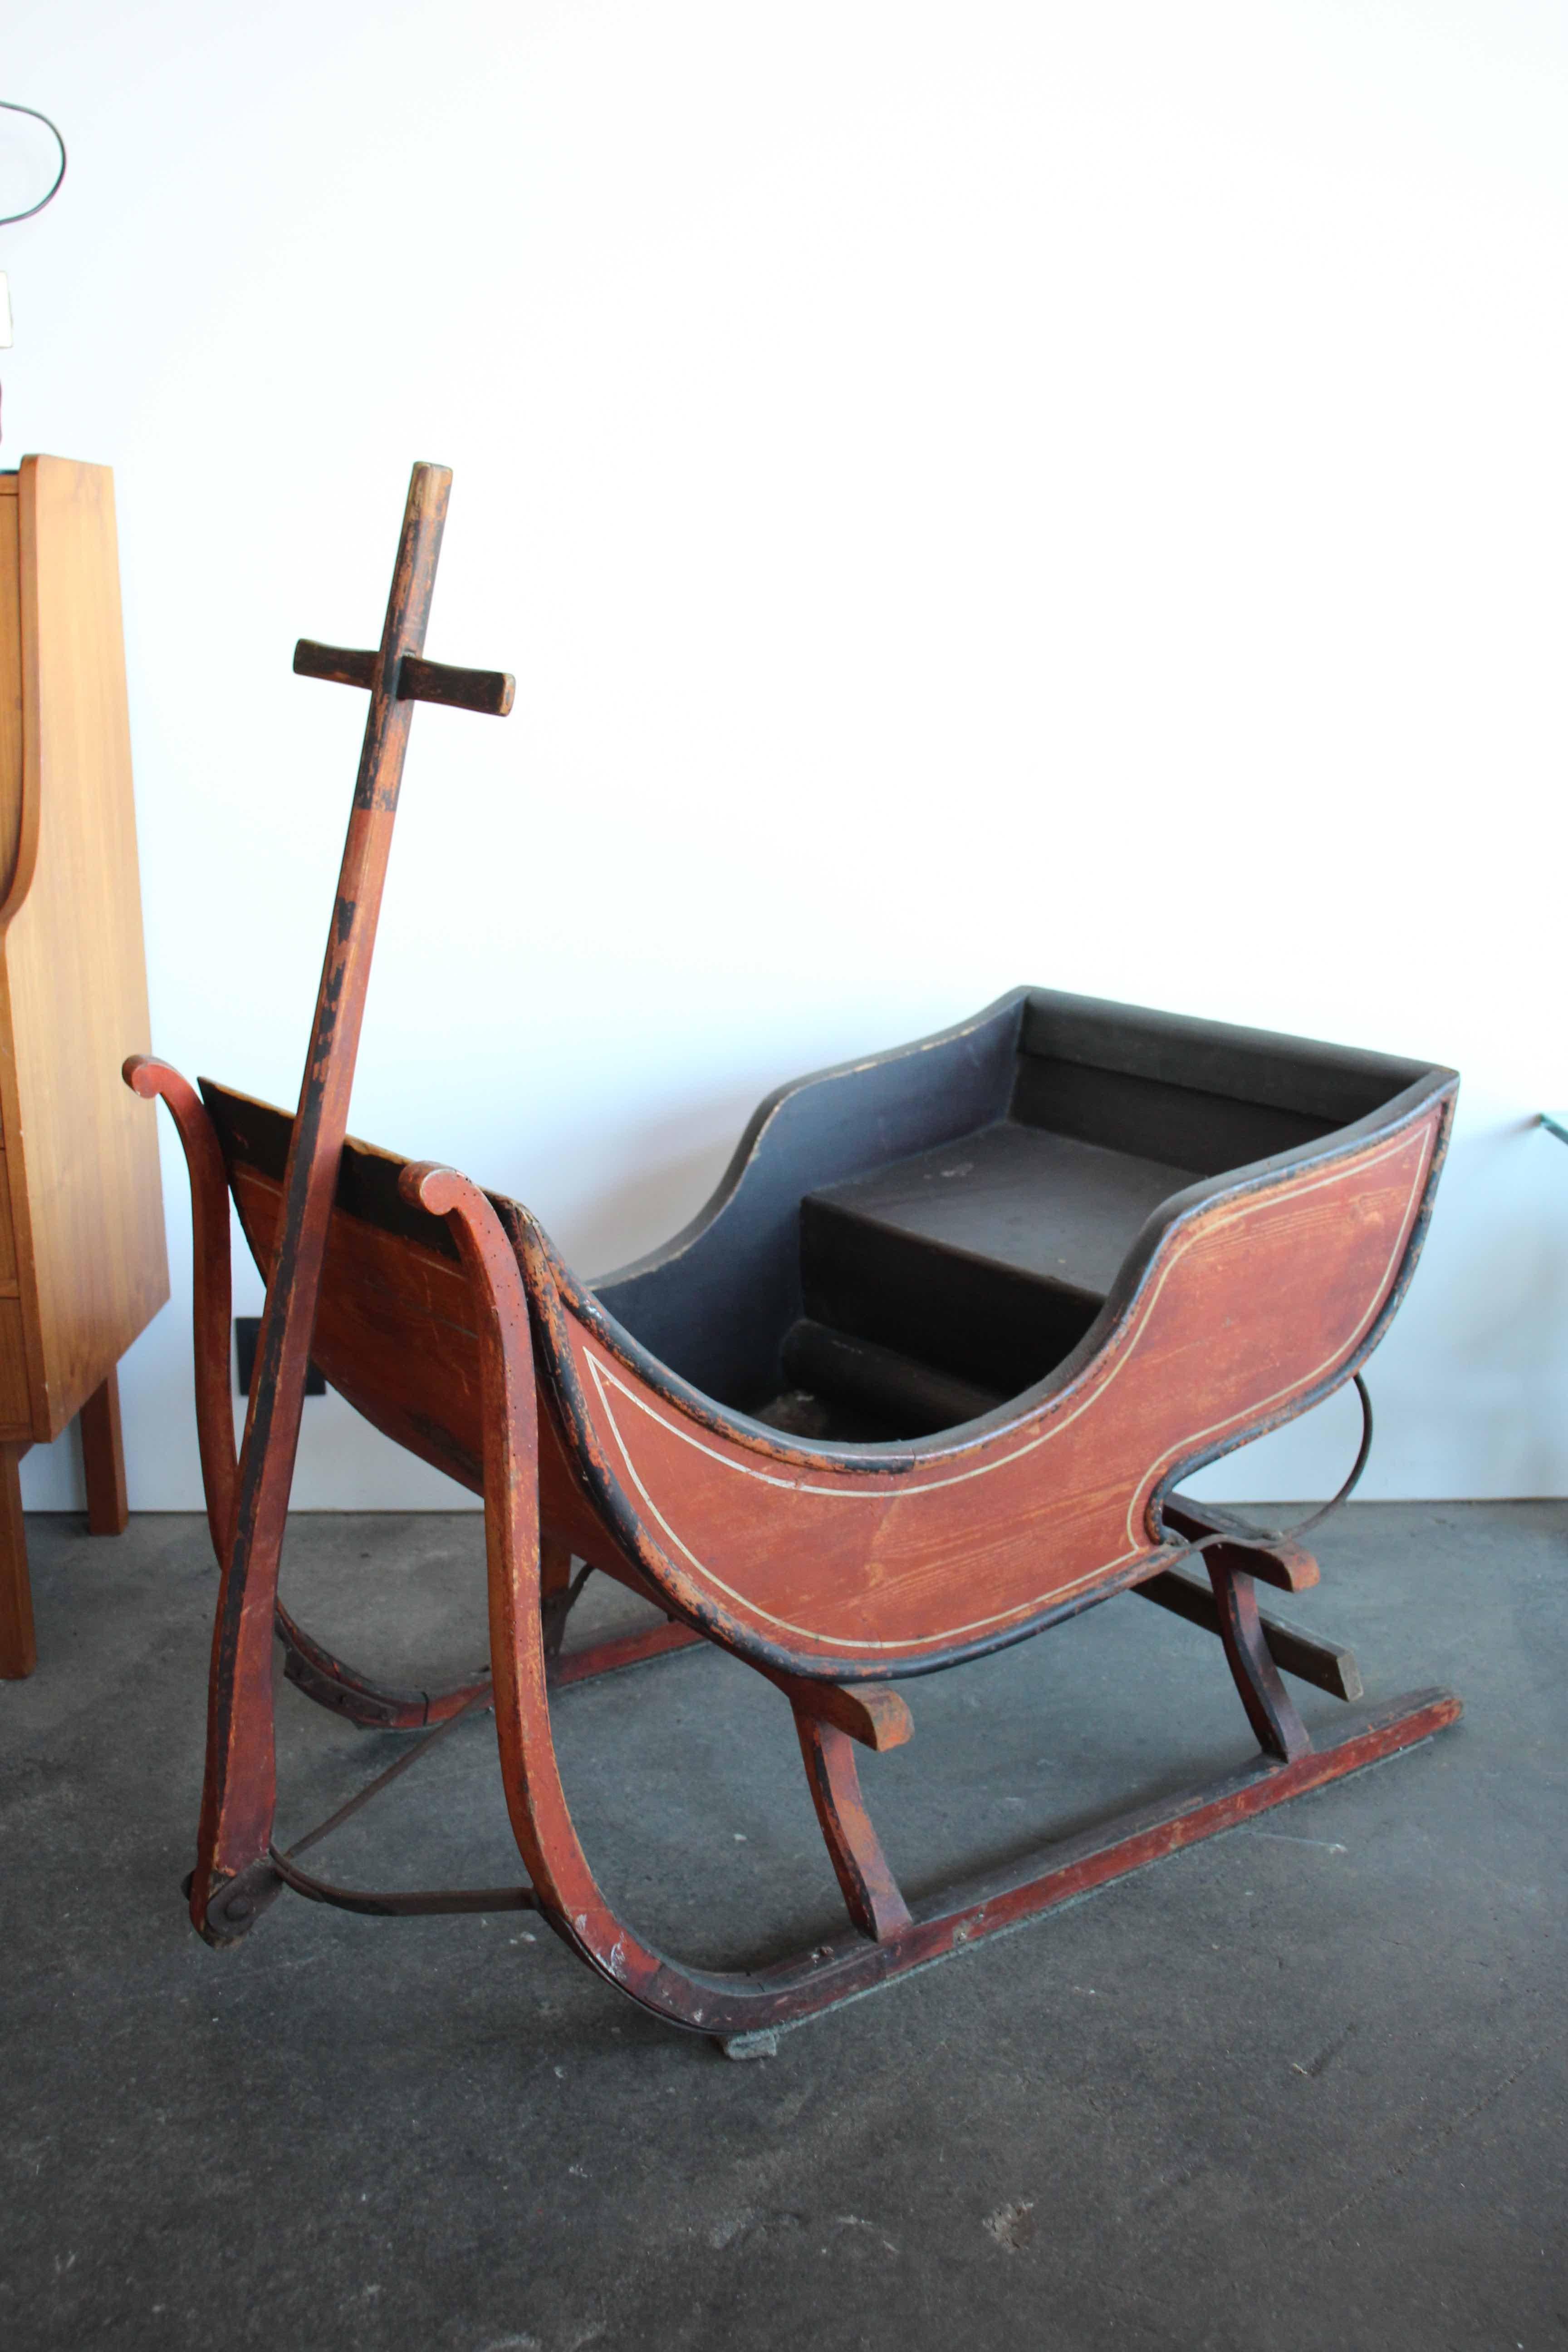 This rare antique sledge still has the original painting from the 19th century. From the outside it is painted in a beautiful rust red and has a golden yellow decorative line, from the inside everything is black. The complete sledge is made of wood